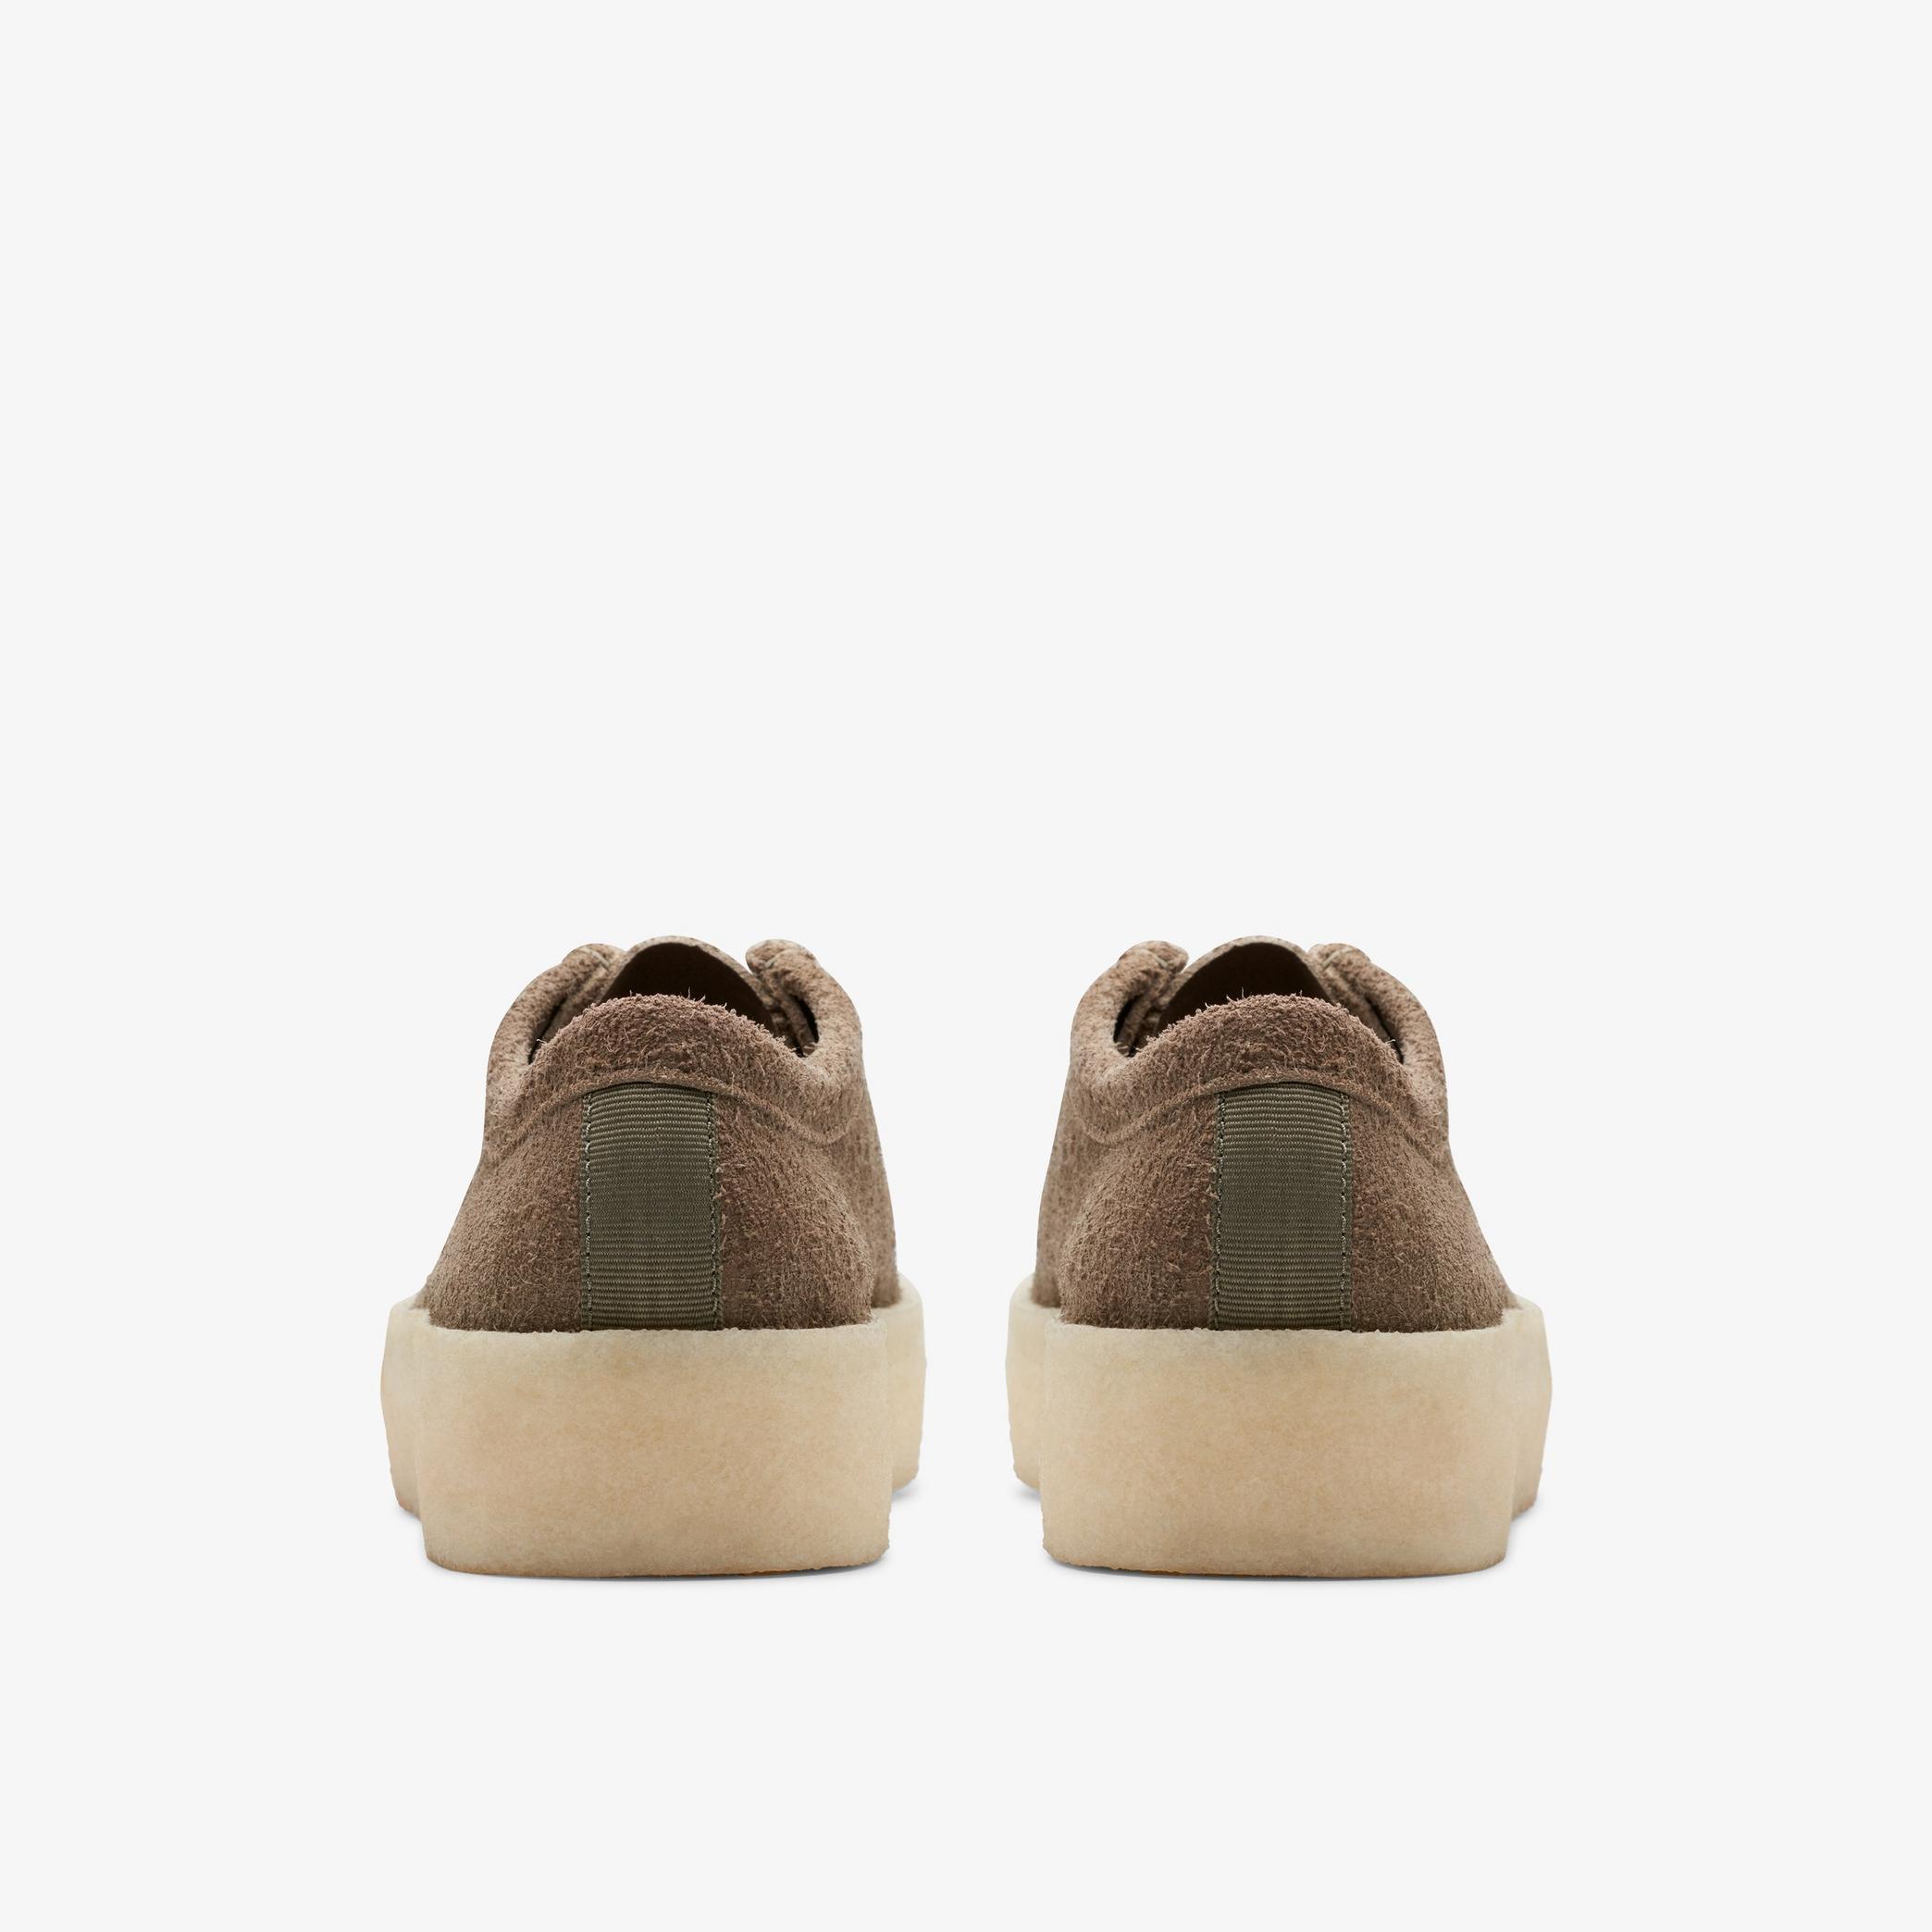 Wallabee Cup Pale Khaki Suede Wallabee, view 5 of 6